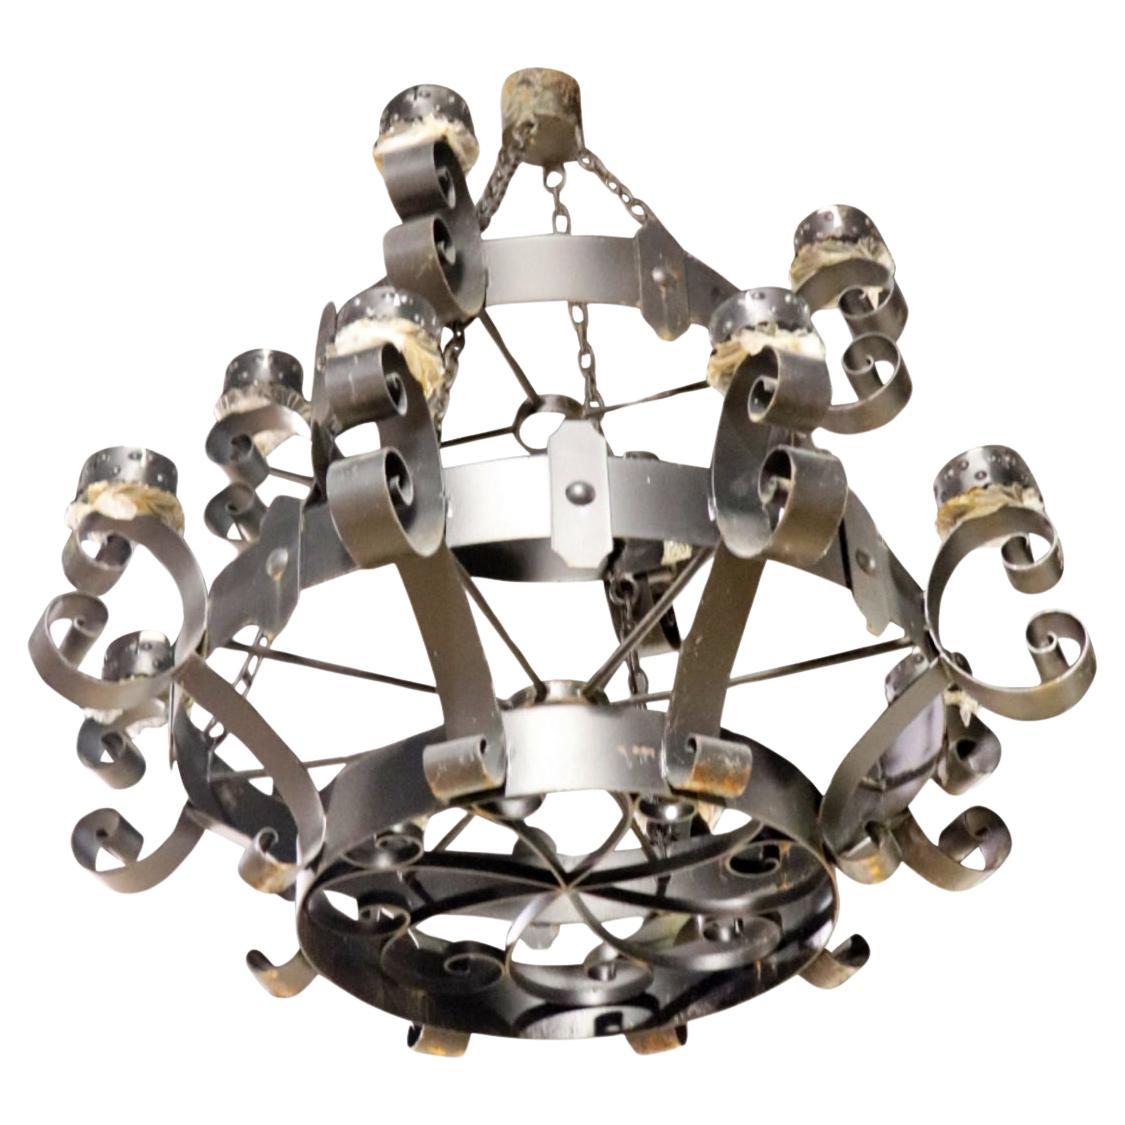 Monumental European Gothic Wrought Iron Black Gothic Chandelier 1 of 3 For Sale